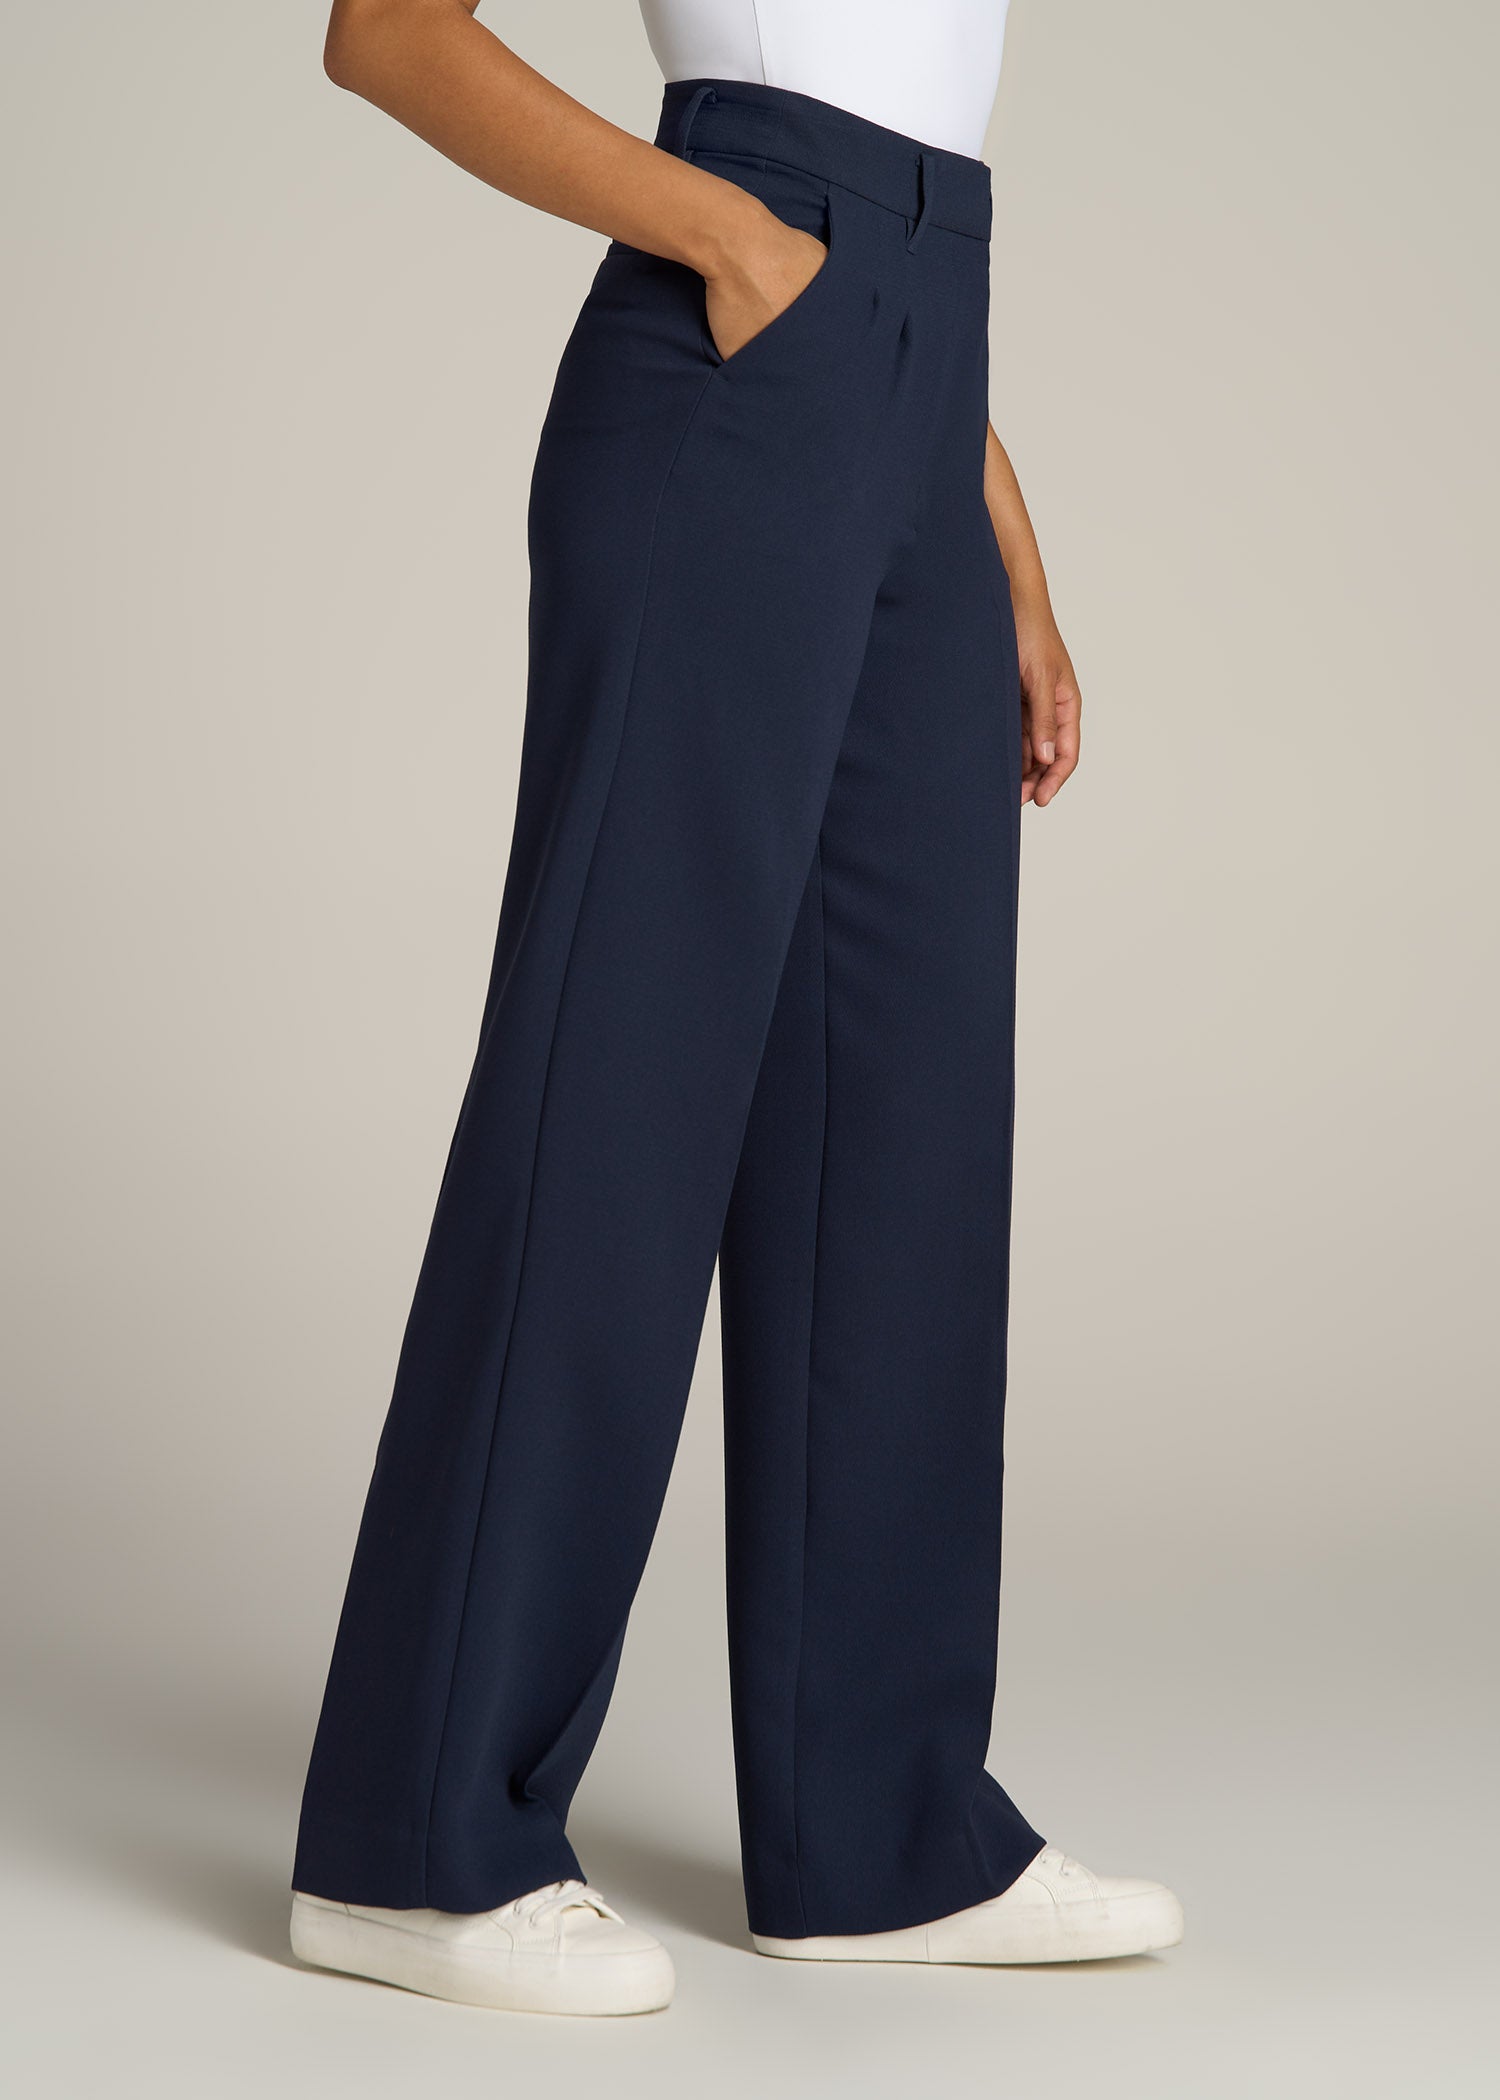 Pleated Dress Pants for Women